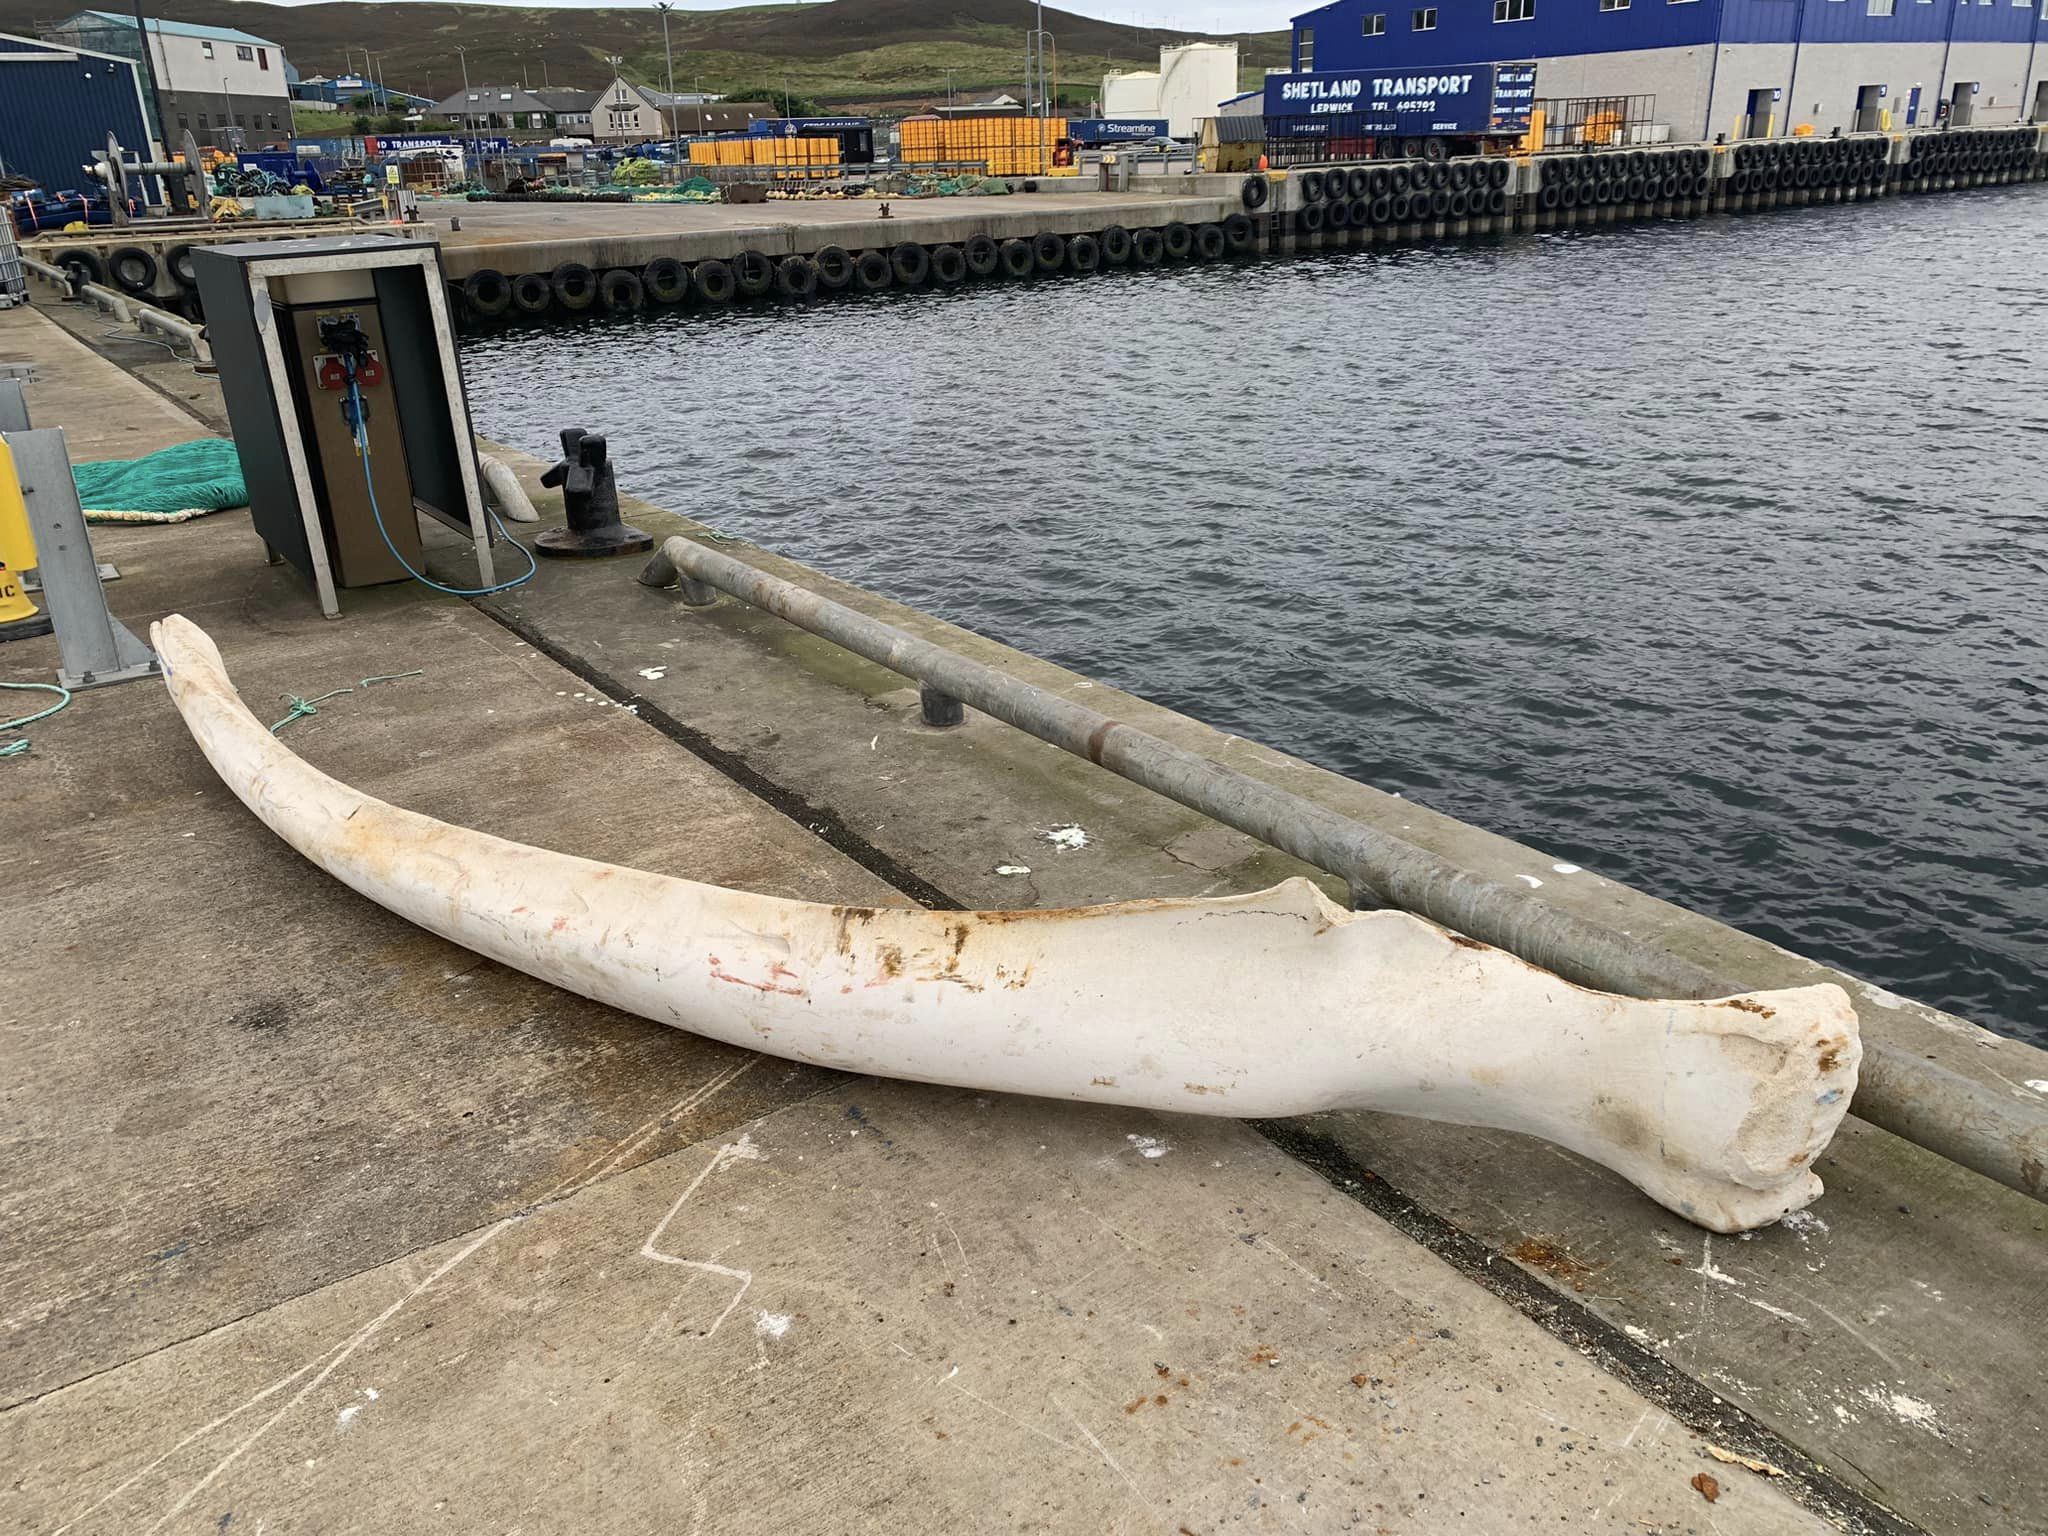 Whale bone caught, housing call and more…